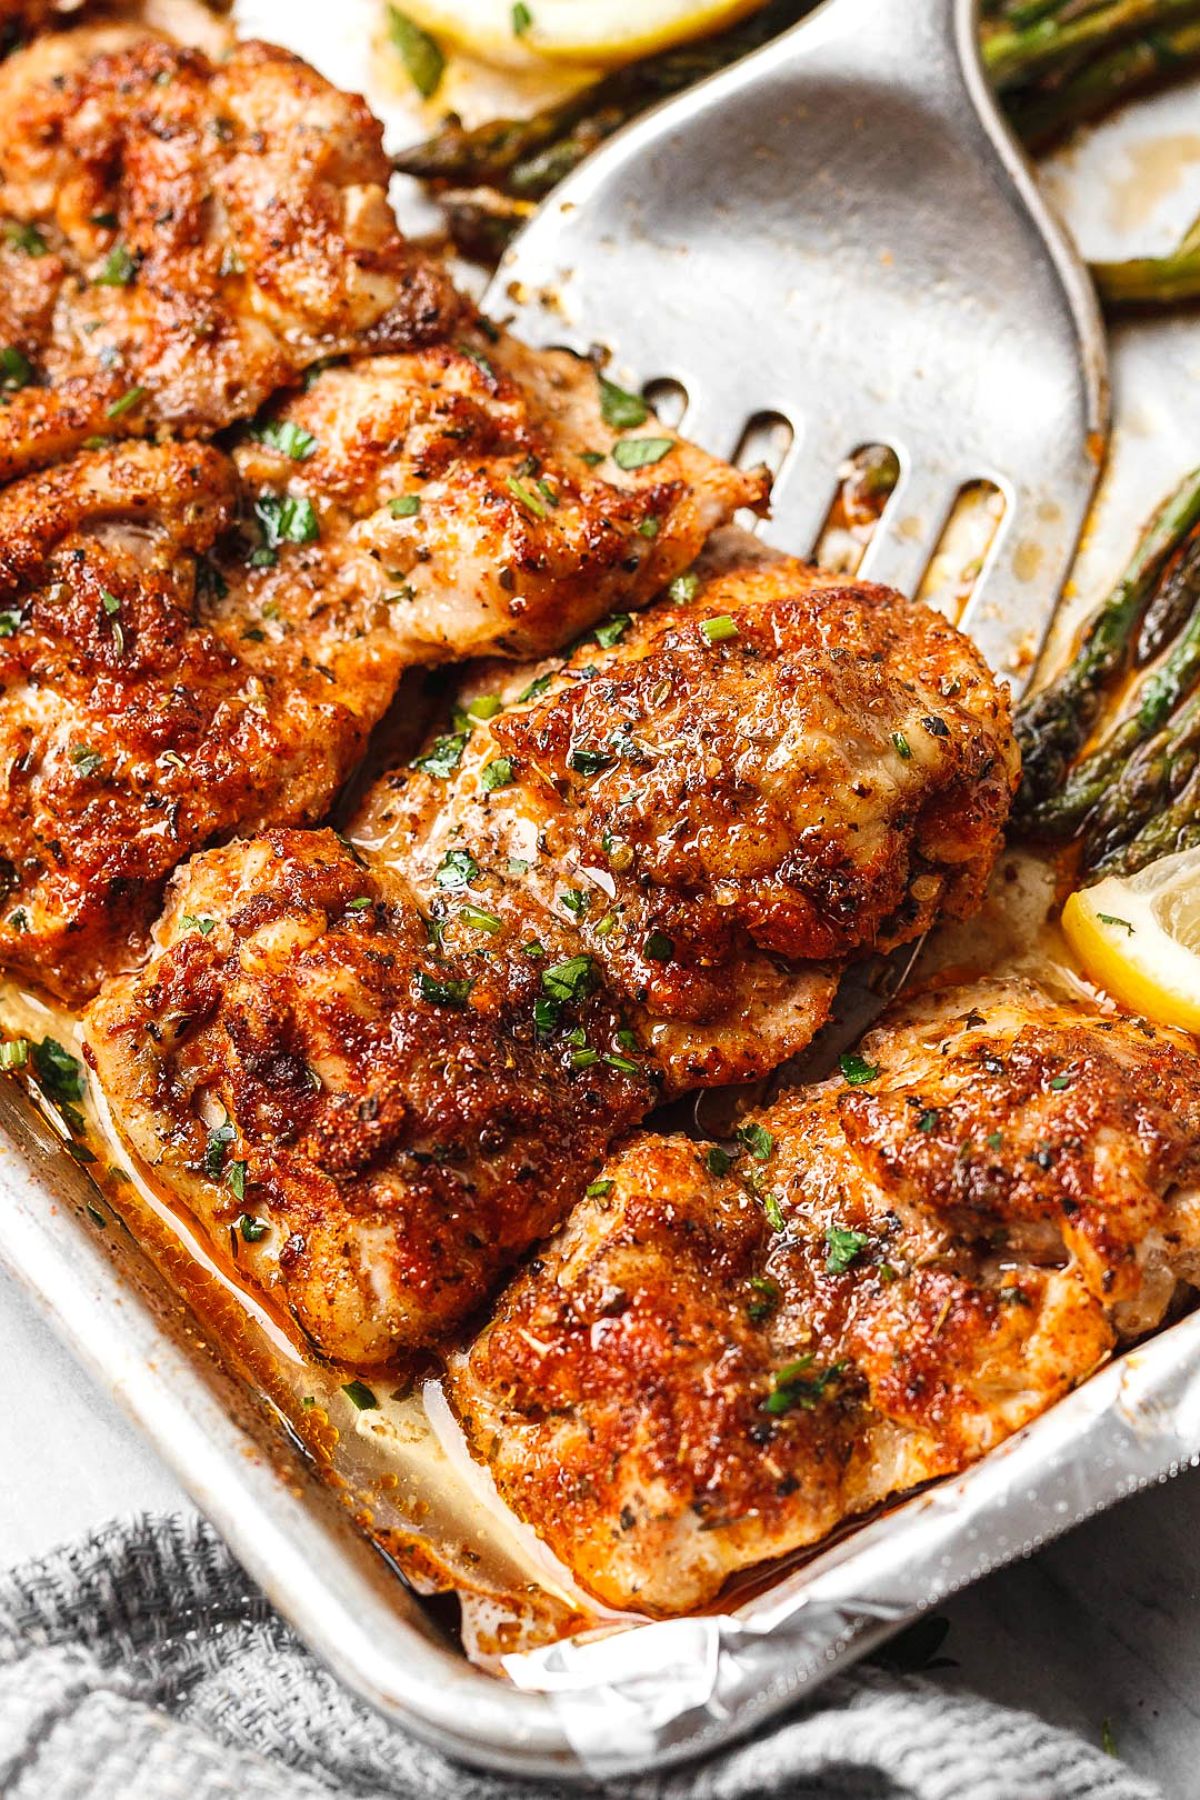 Juicy gluten-free Best Oven-Baked Chicken on a baking tray picked with a spatula.